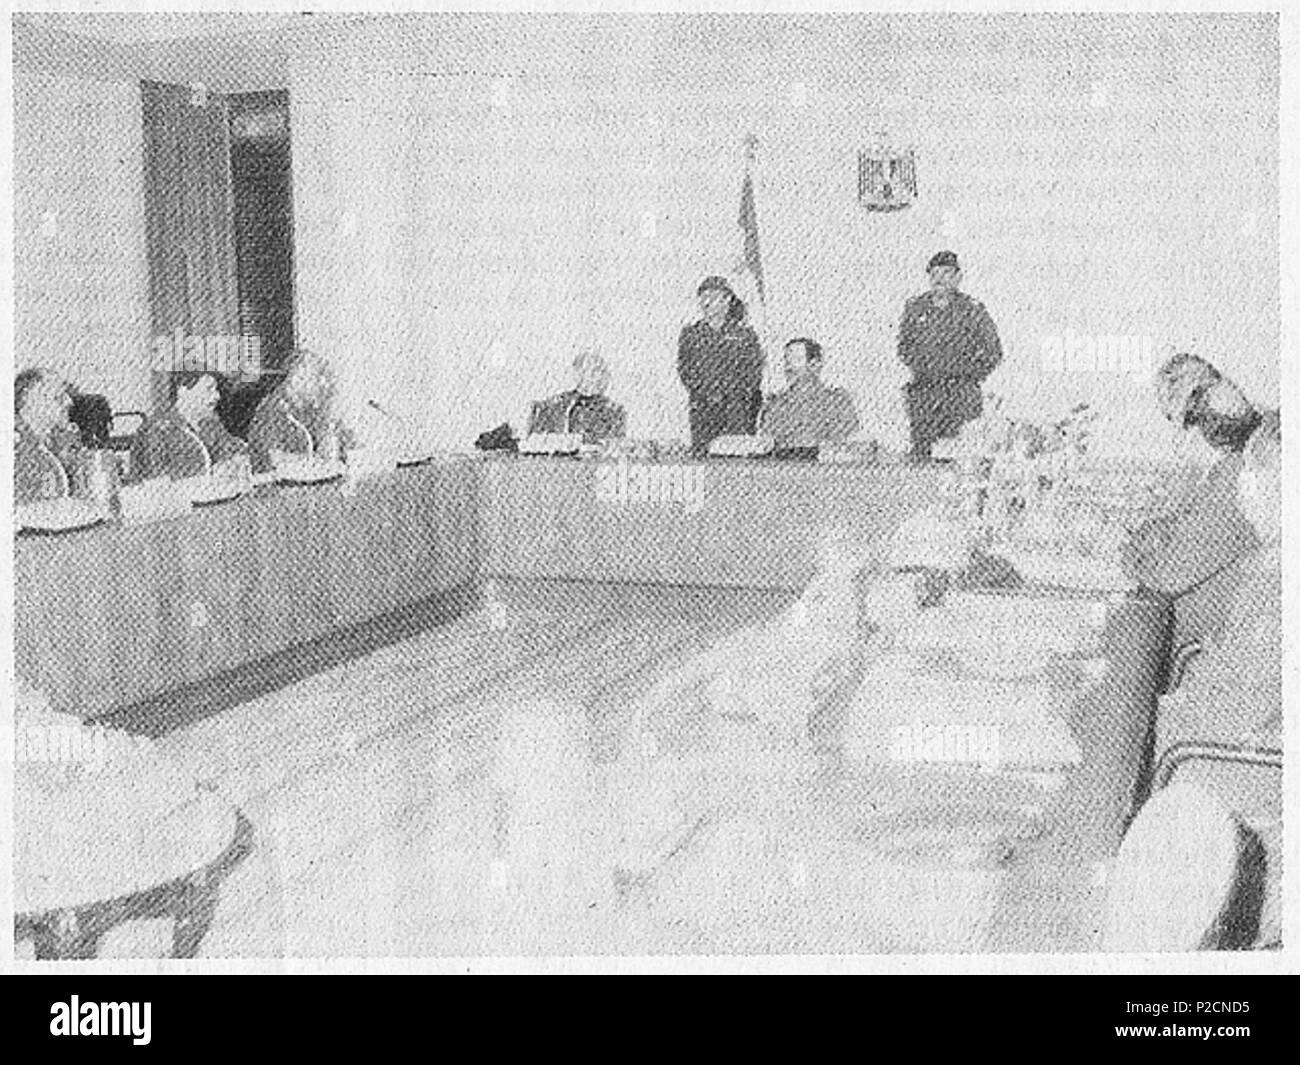 . English: Joint meeting of the Revolution Command Council (RCC) and the Regional Command of the Arab Socialist Ba'th Party in Baghdad, Iraq, on June 16th of 1988, presided by Iraqi President Saddam Hussein / on his right side is RCC deputy chairman Izzat Ibrahim ad-Duri . 16 June 1988. Iraqi News Agency 61 TBO 17061988 RCC Stock Photo